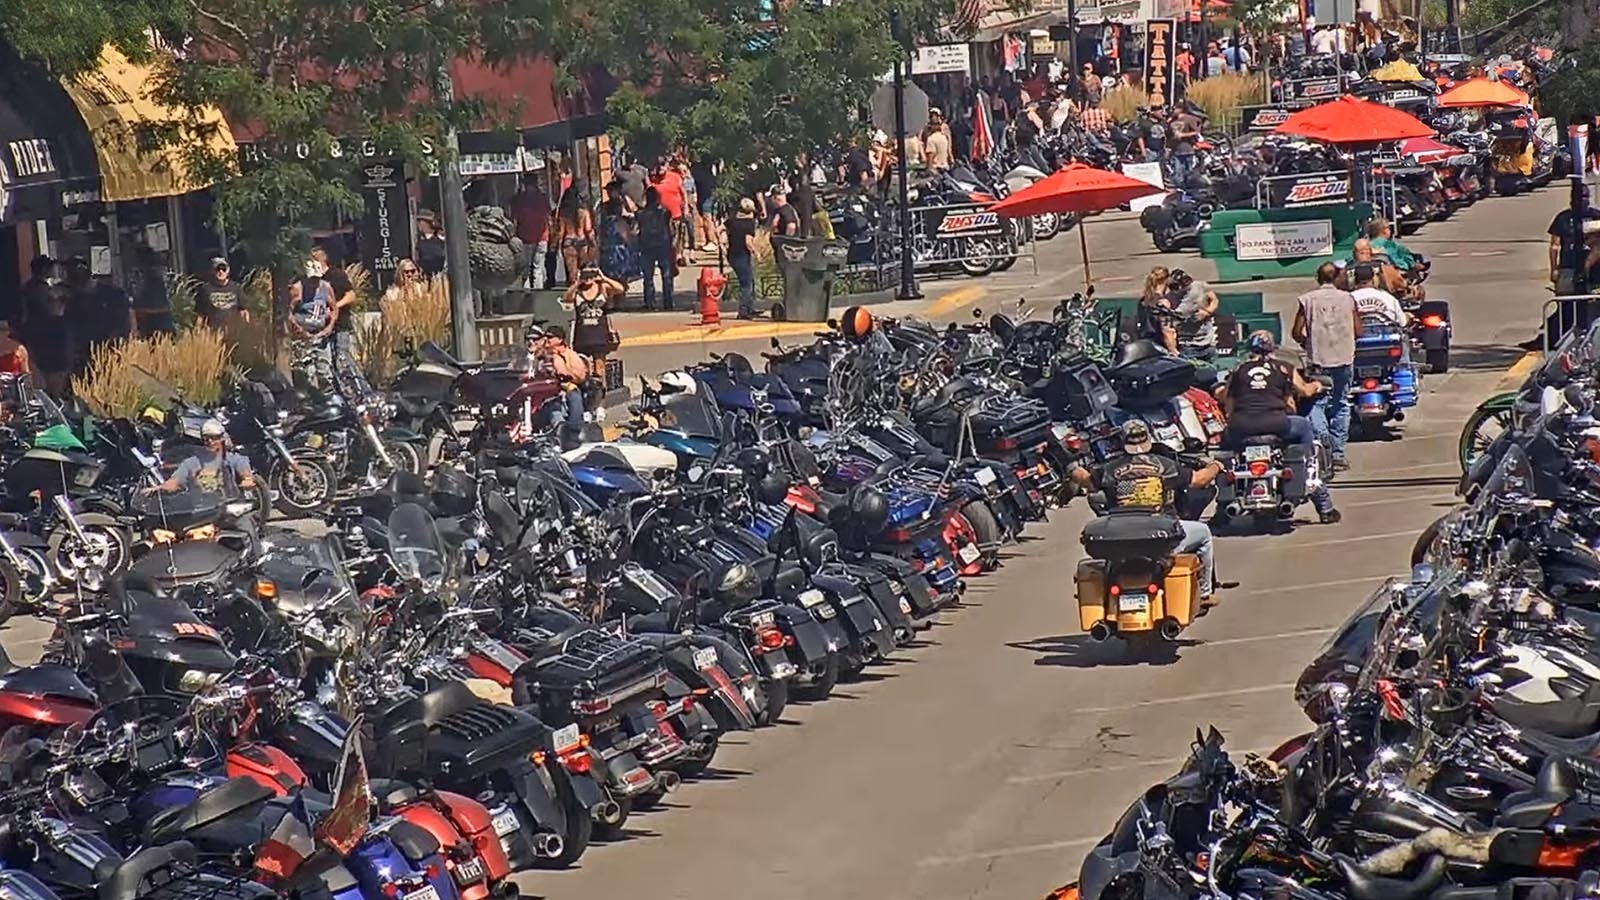 The 84th Sturgis Motorcycle Rally has packed the South Dakota town with Harley-Davidsons and all other brands of bikes.